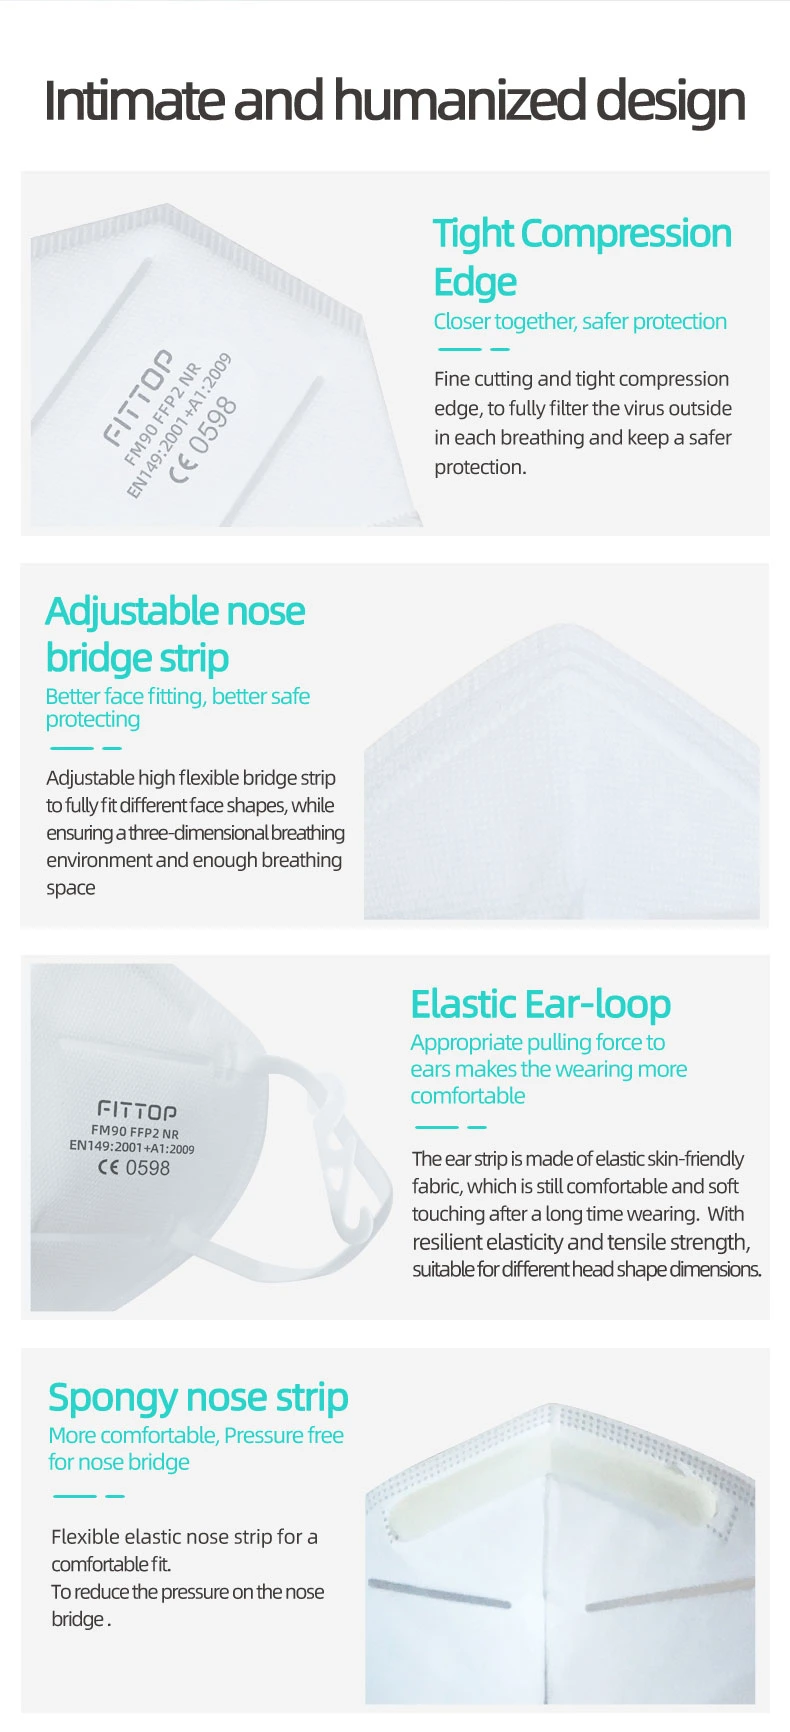 KN95 Face Mask Whitelist CE Filtering Half Mask Particulate Respirator FFP2 Disposable Protective Masks